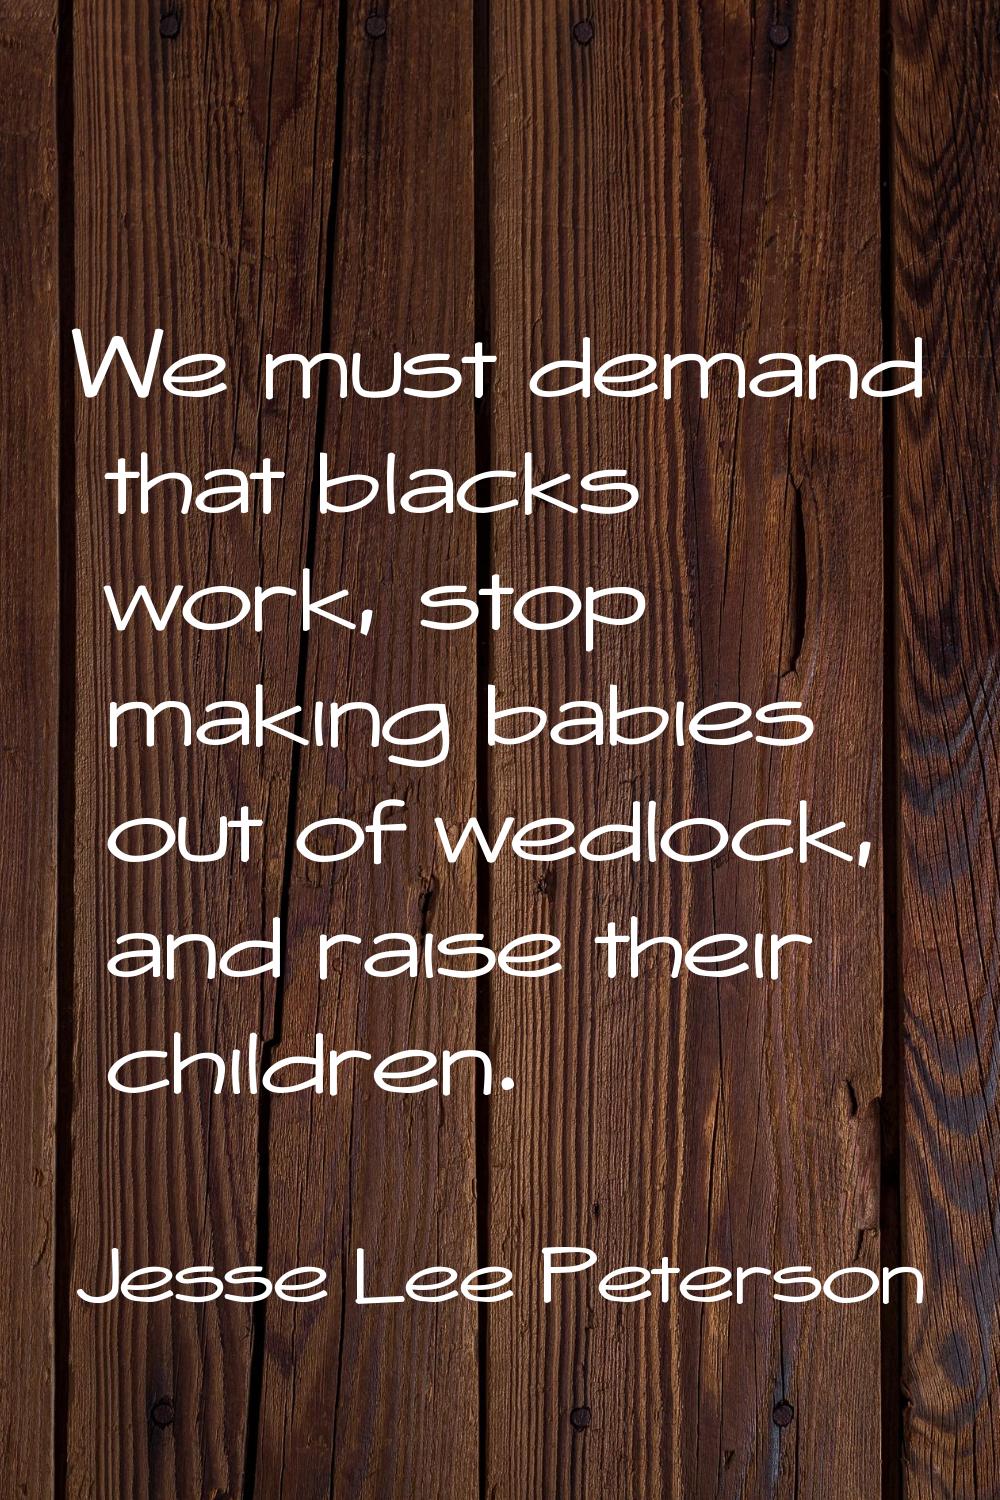 We must demand that blacks work, stop making babies out of wedlock, and raise their children.